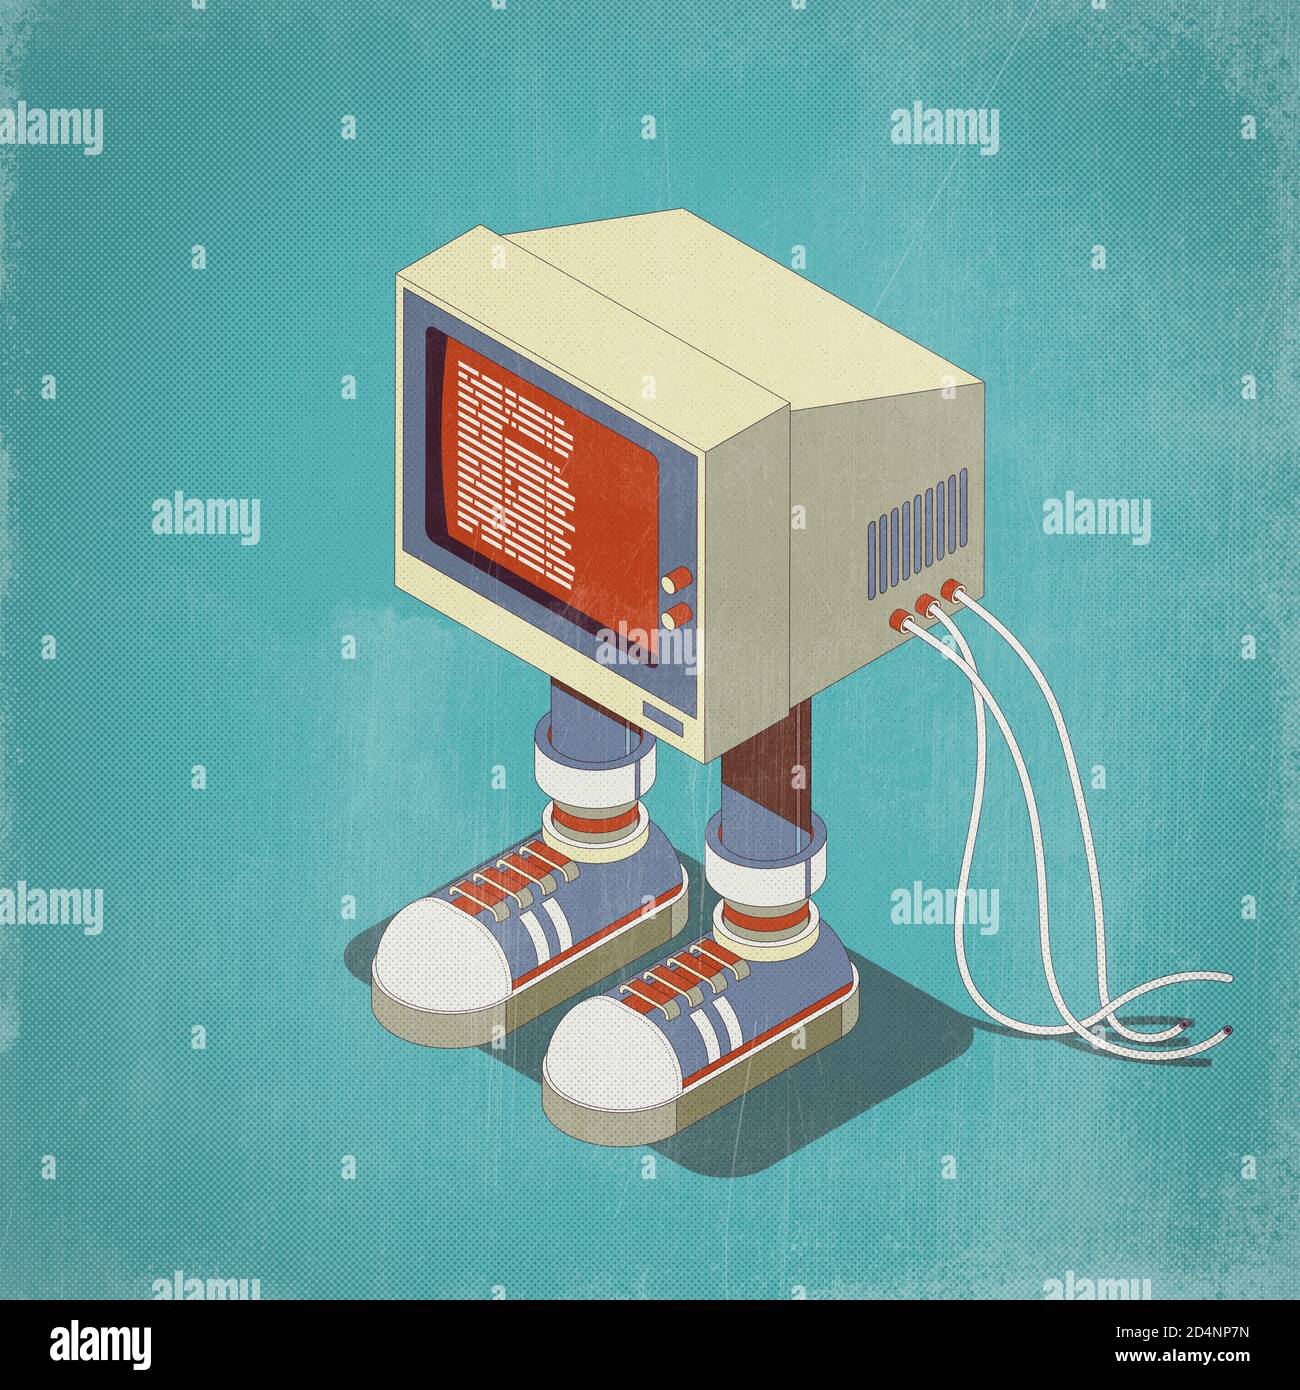 Funny vintage computer character with sneakers, isometric 3D illustration Stock Photo